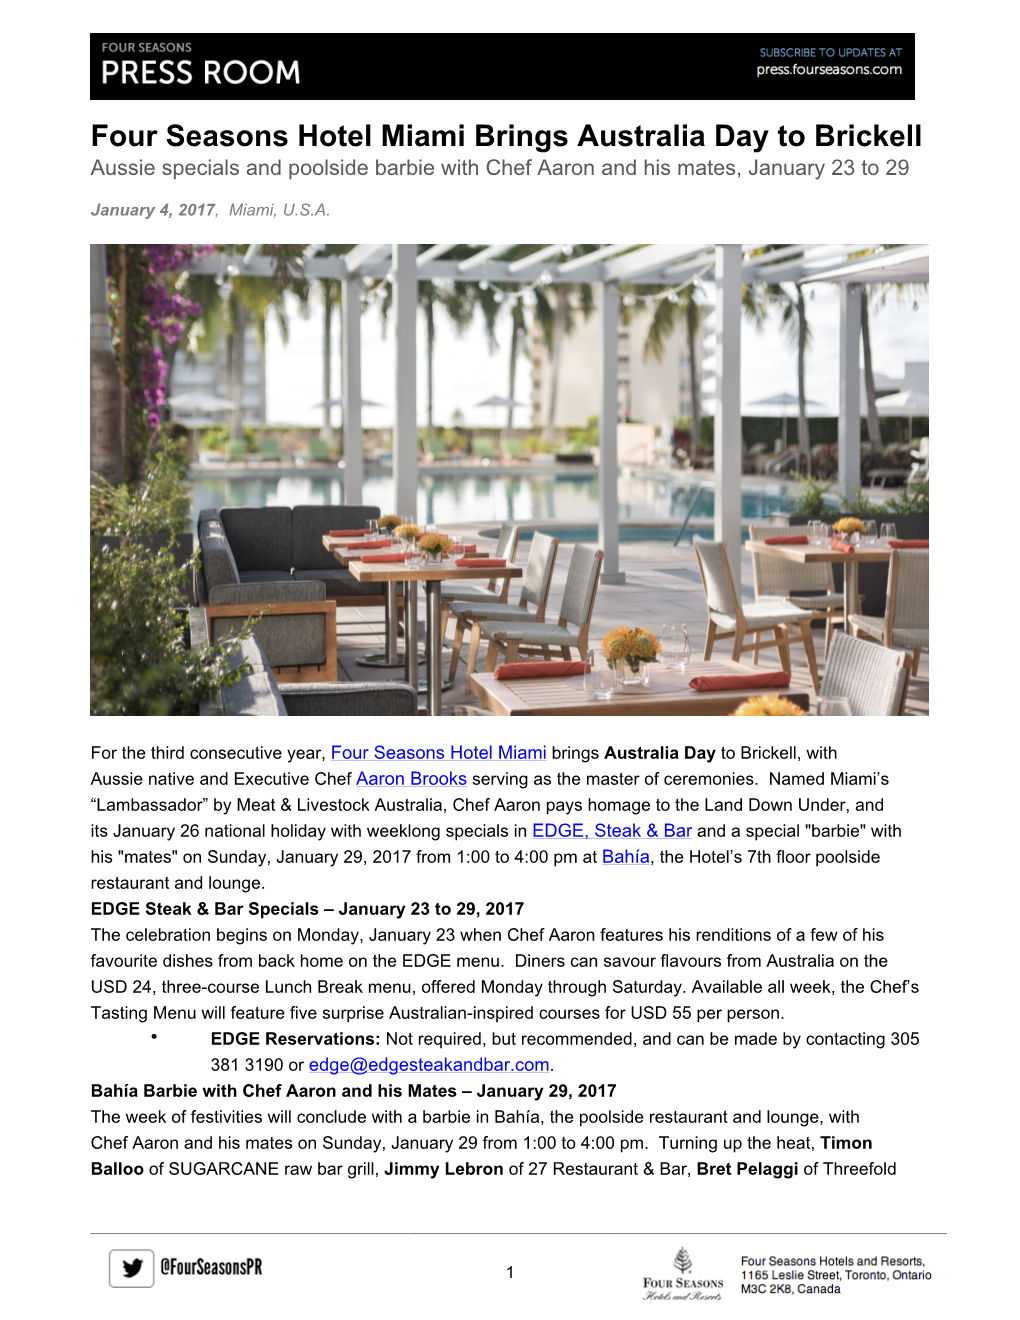 Four Seasons Hotel Miami Brings Australia Day to Brickell Aussie Specials and Poolside Barbie with Chef Aaron and His Mates, January 23 to 29